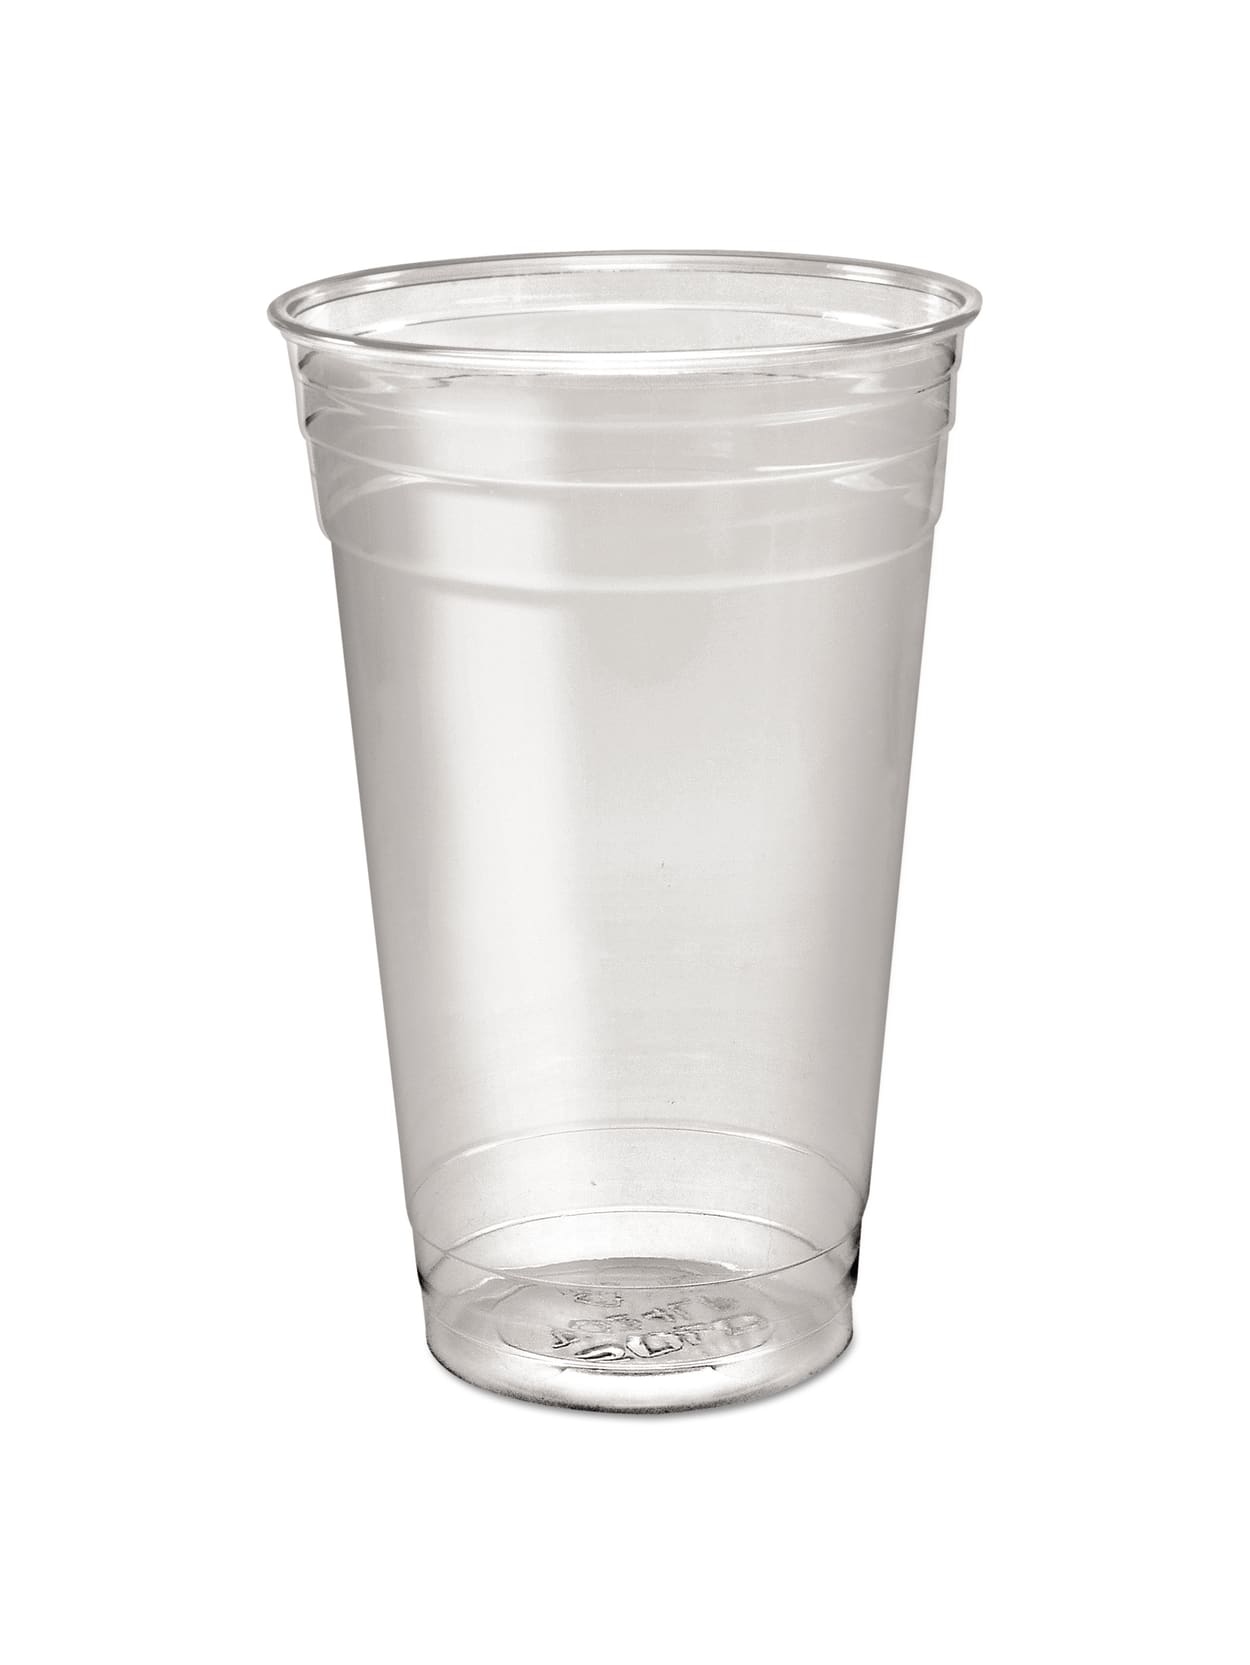 clear solo cups